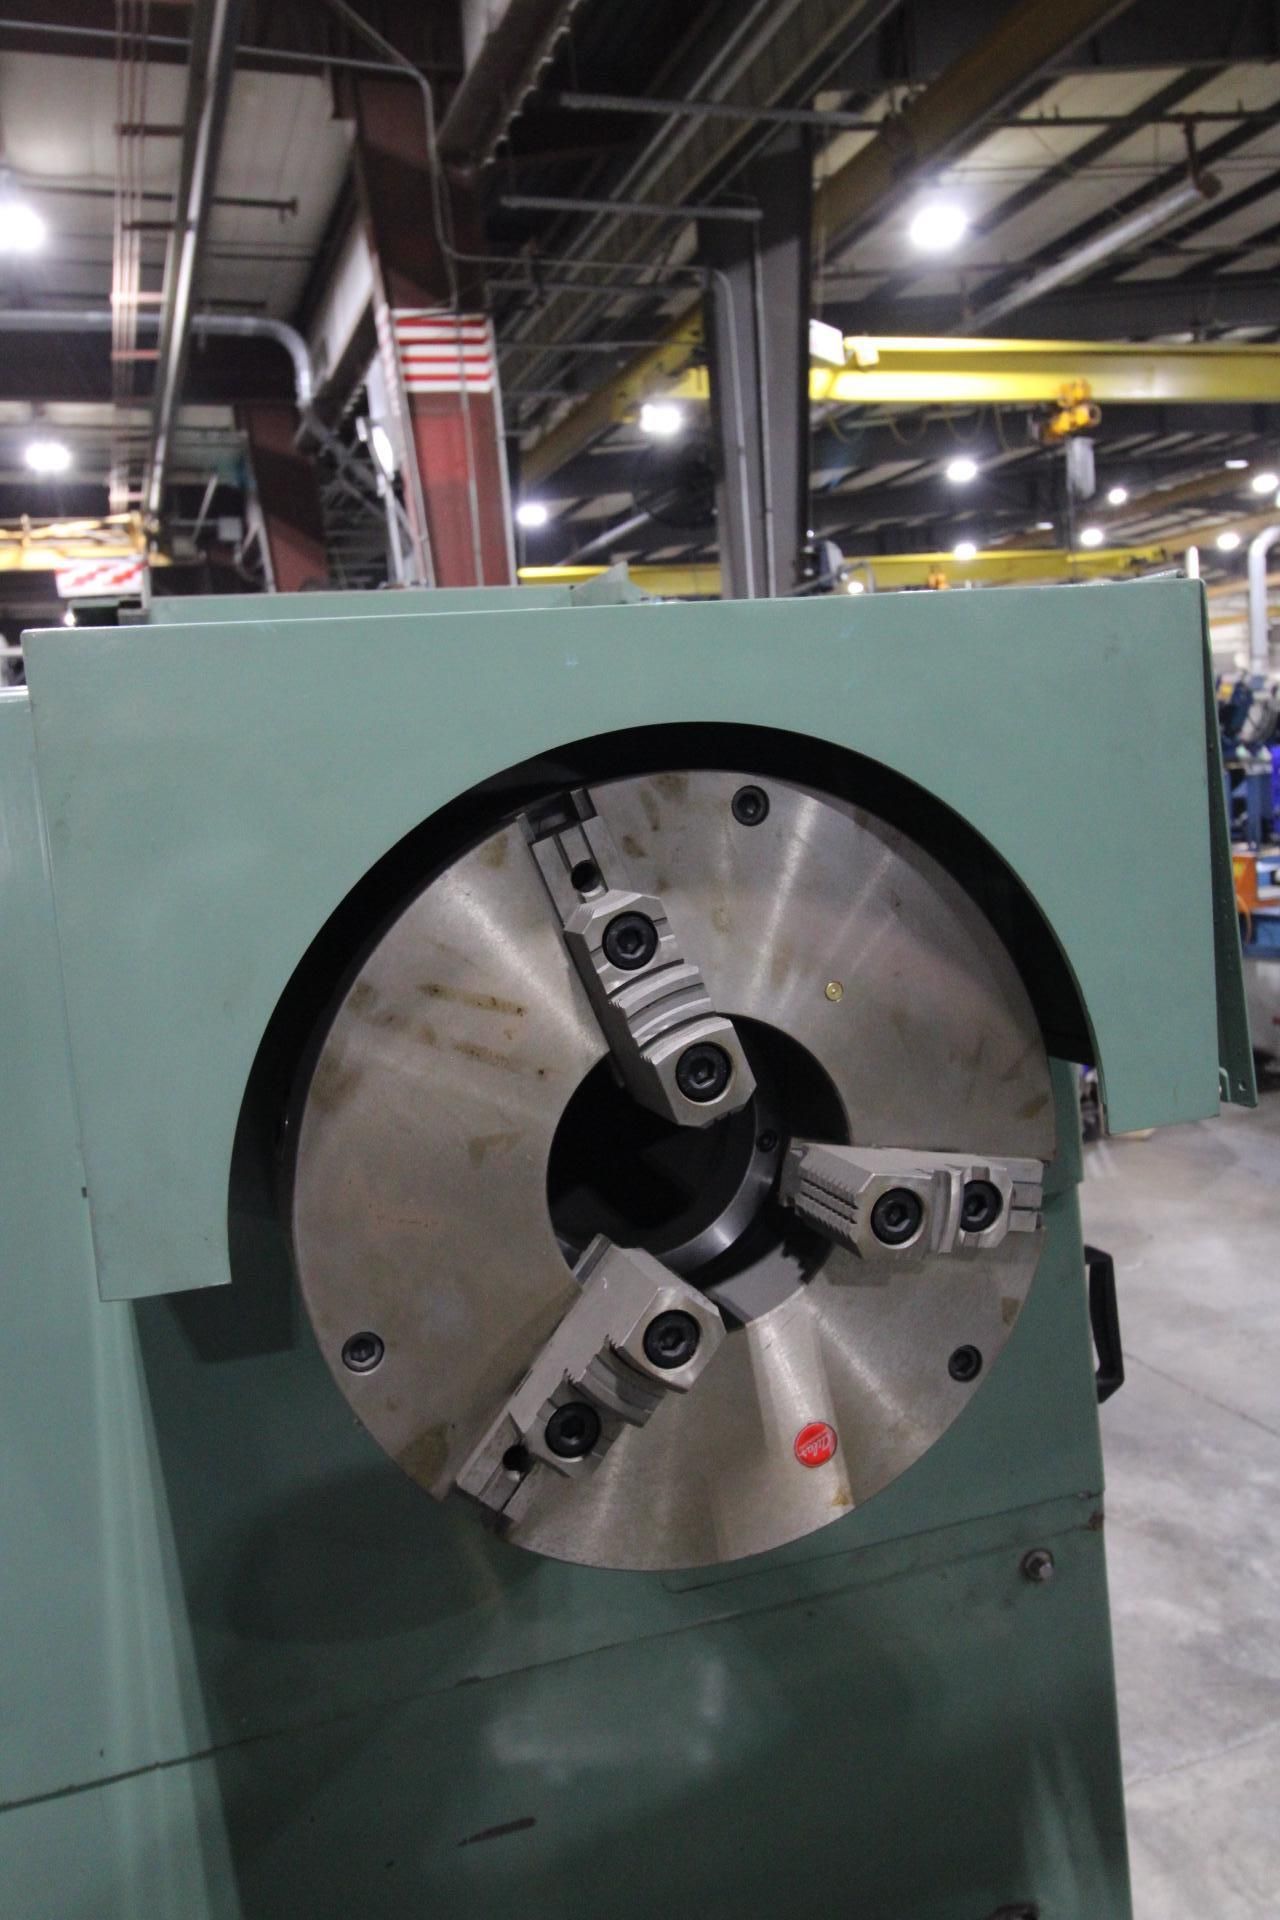 HOLLOW SPINDLE LATHE, KINGSTON HEAVY DUTY 34 HP-2000, new 2014, never used in production, 7-1/4" sp - Image 21 of 23